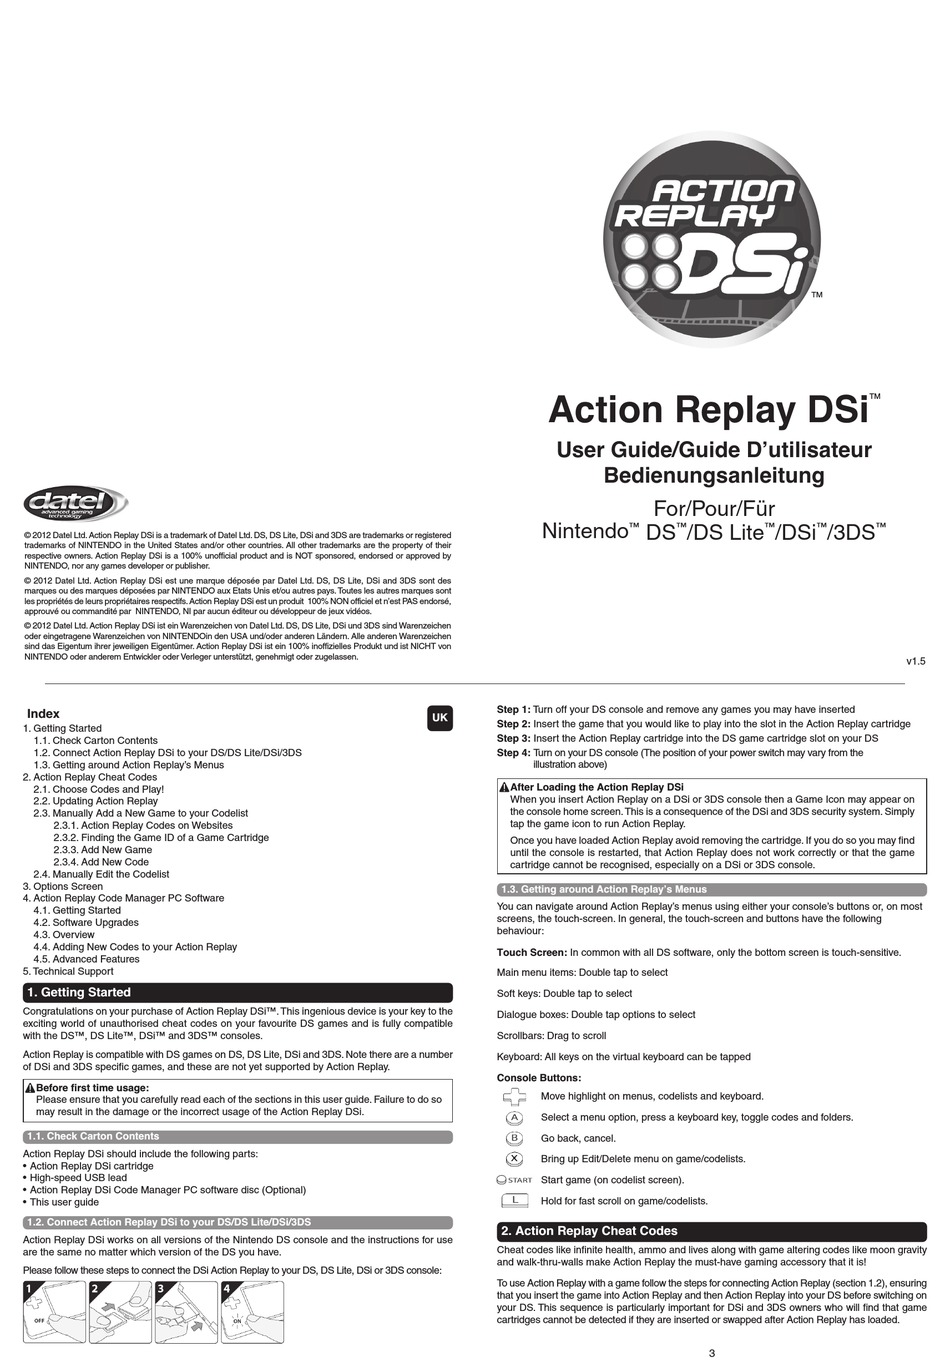 codejunkies action replay ds firmware 1.55